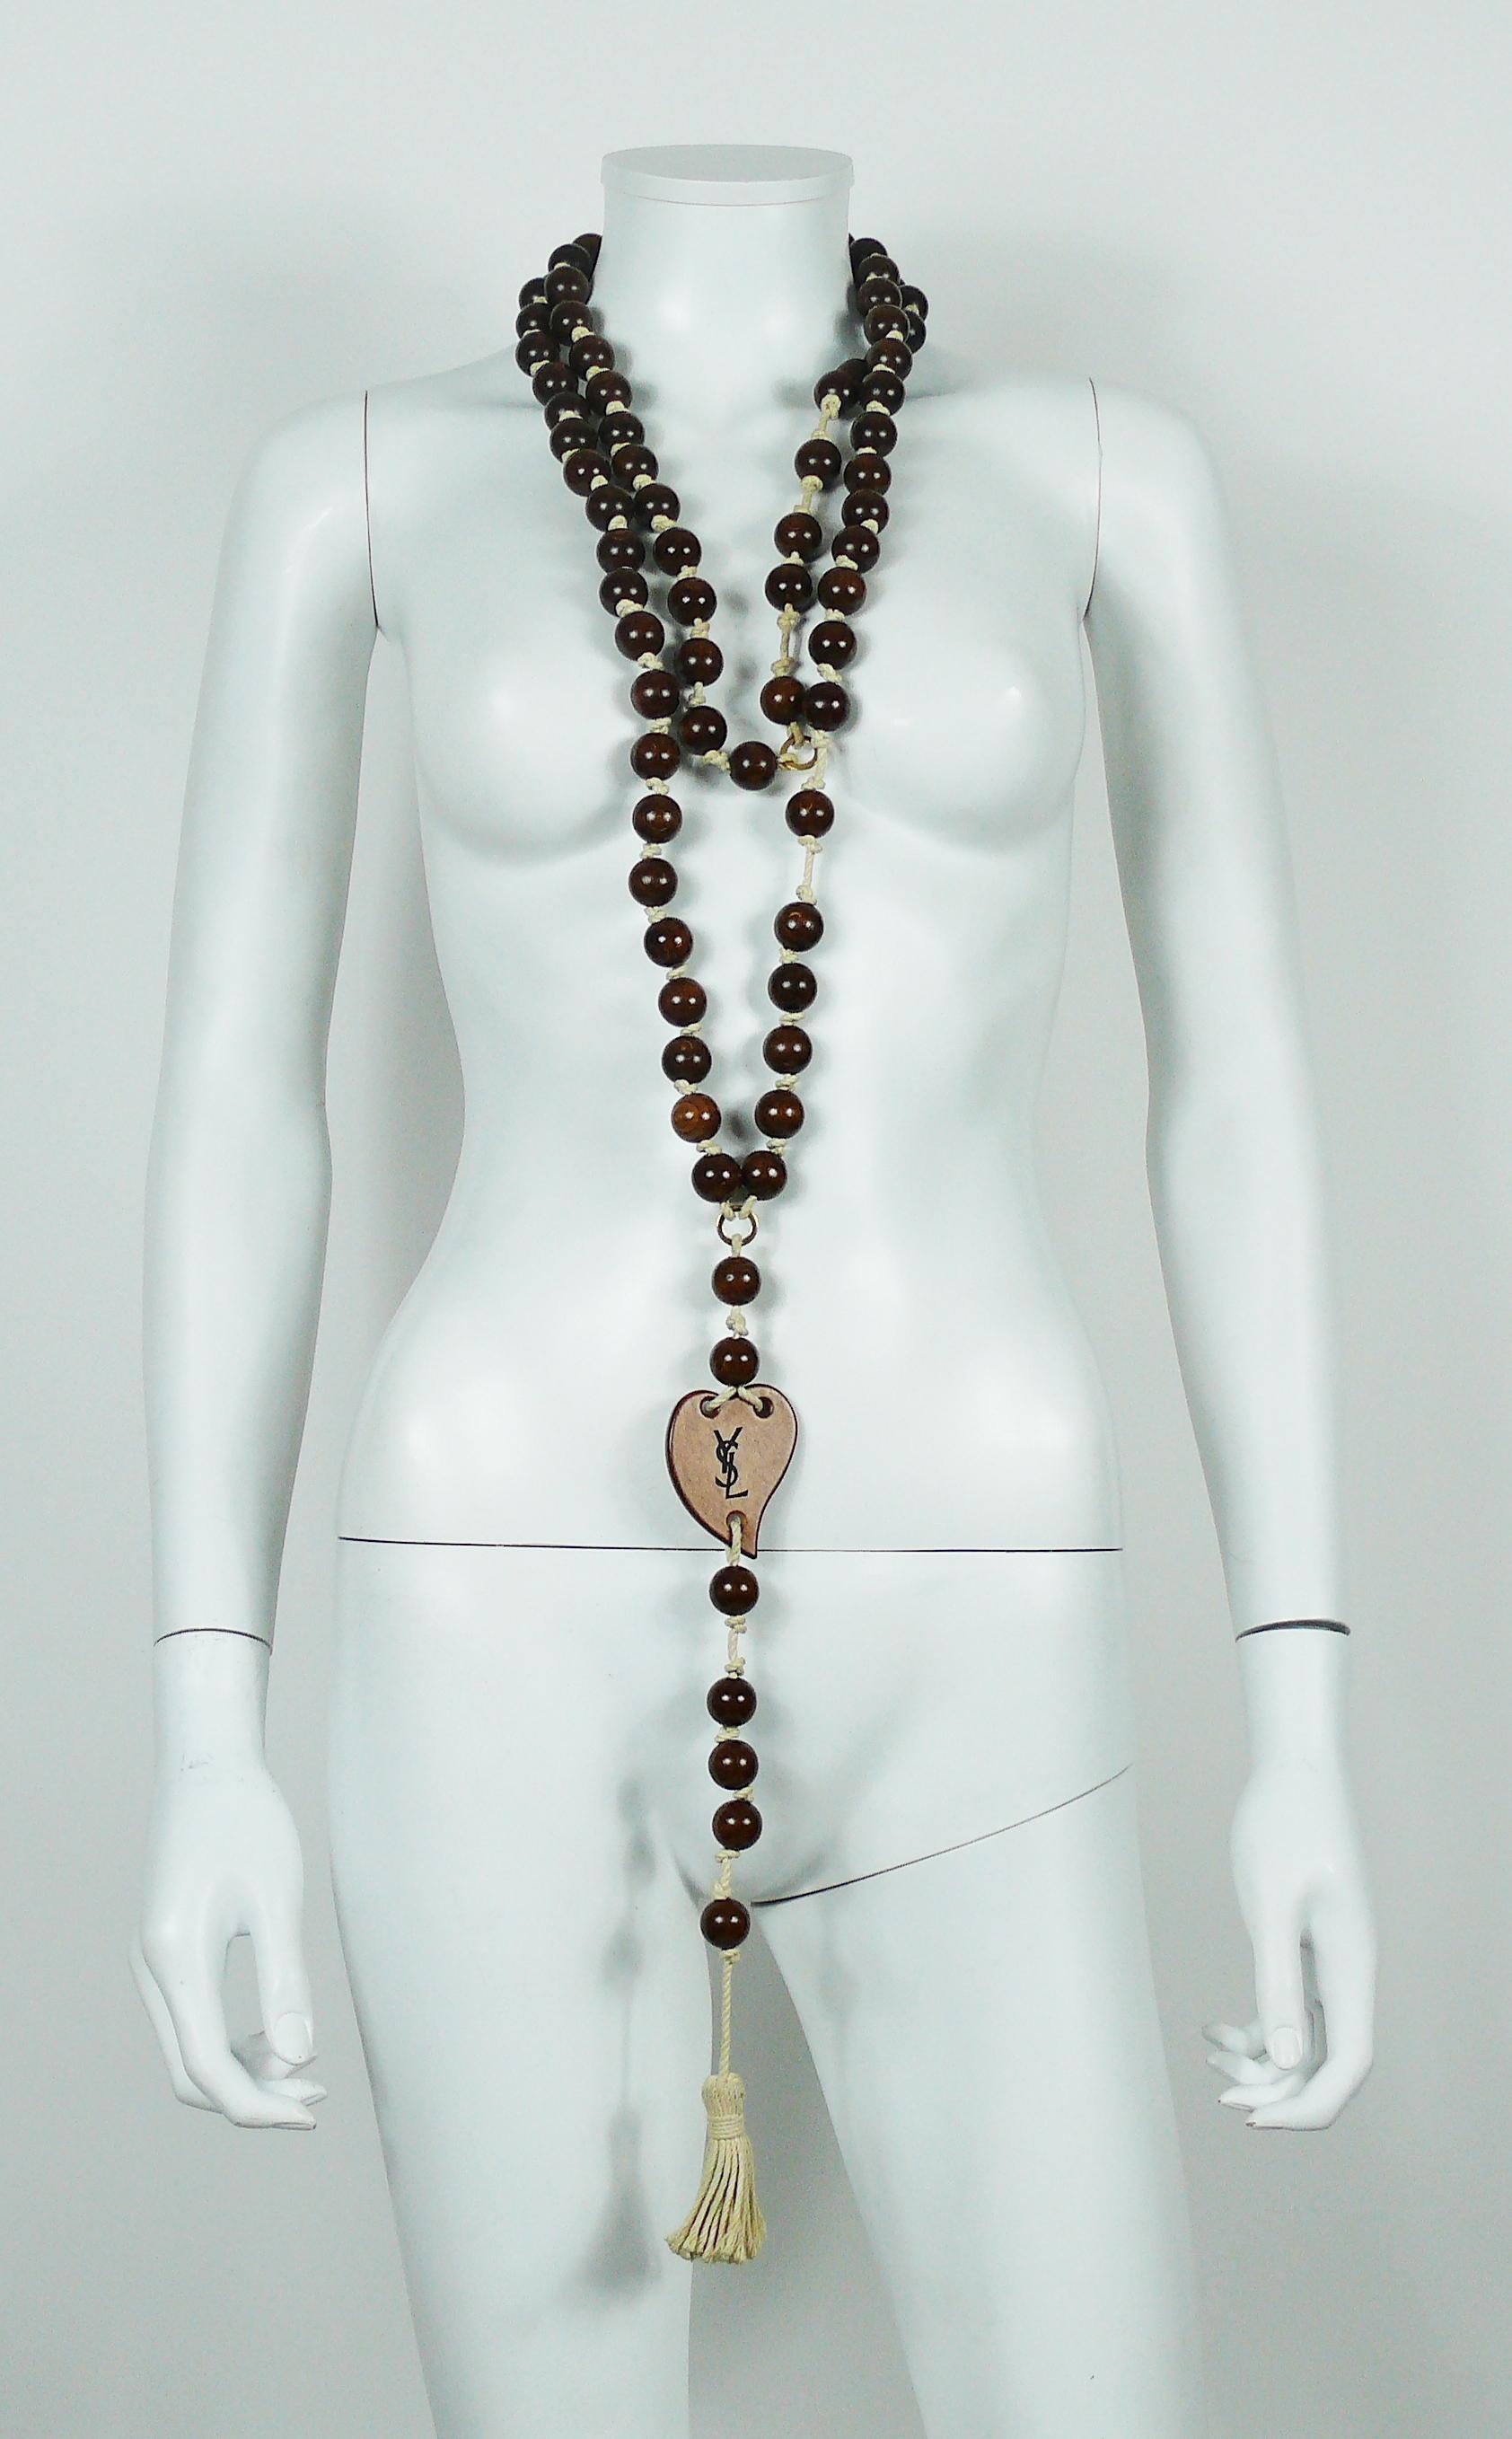 YVES SAINT LAURENT off-white rope tassel necklace featuring natural wood beads and heart.

Extra long length.
Slips on.

Embossed YSL on the heart.

Indicative measurements : length incl. tassel approx. 127 cm (50 inches).
Please note that we have